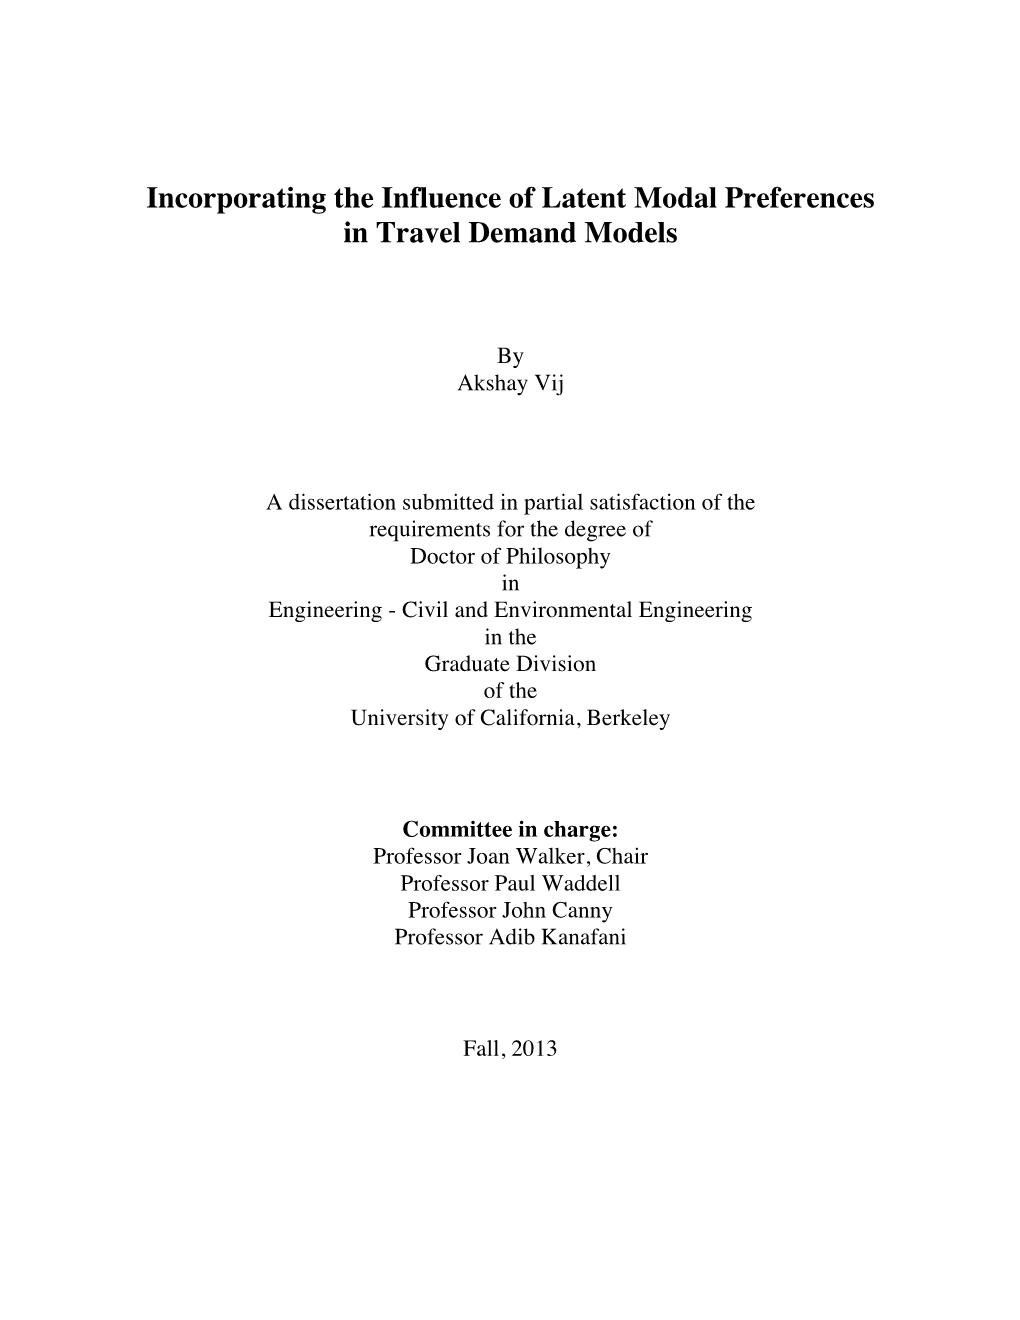 Incorporating the Influence of Latent Modal Preferences in Travel Demand Models